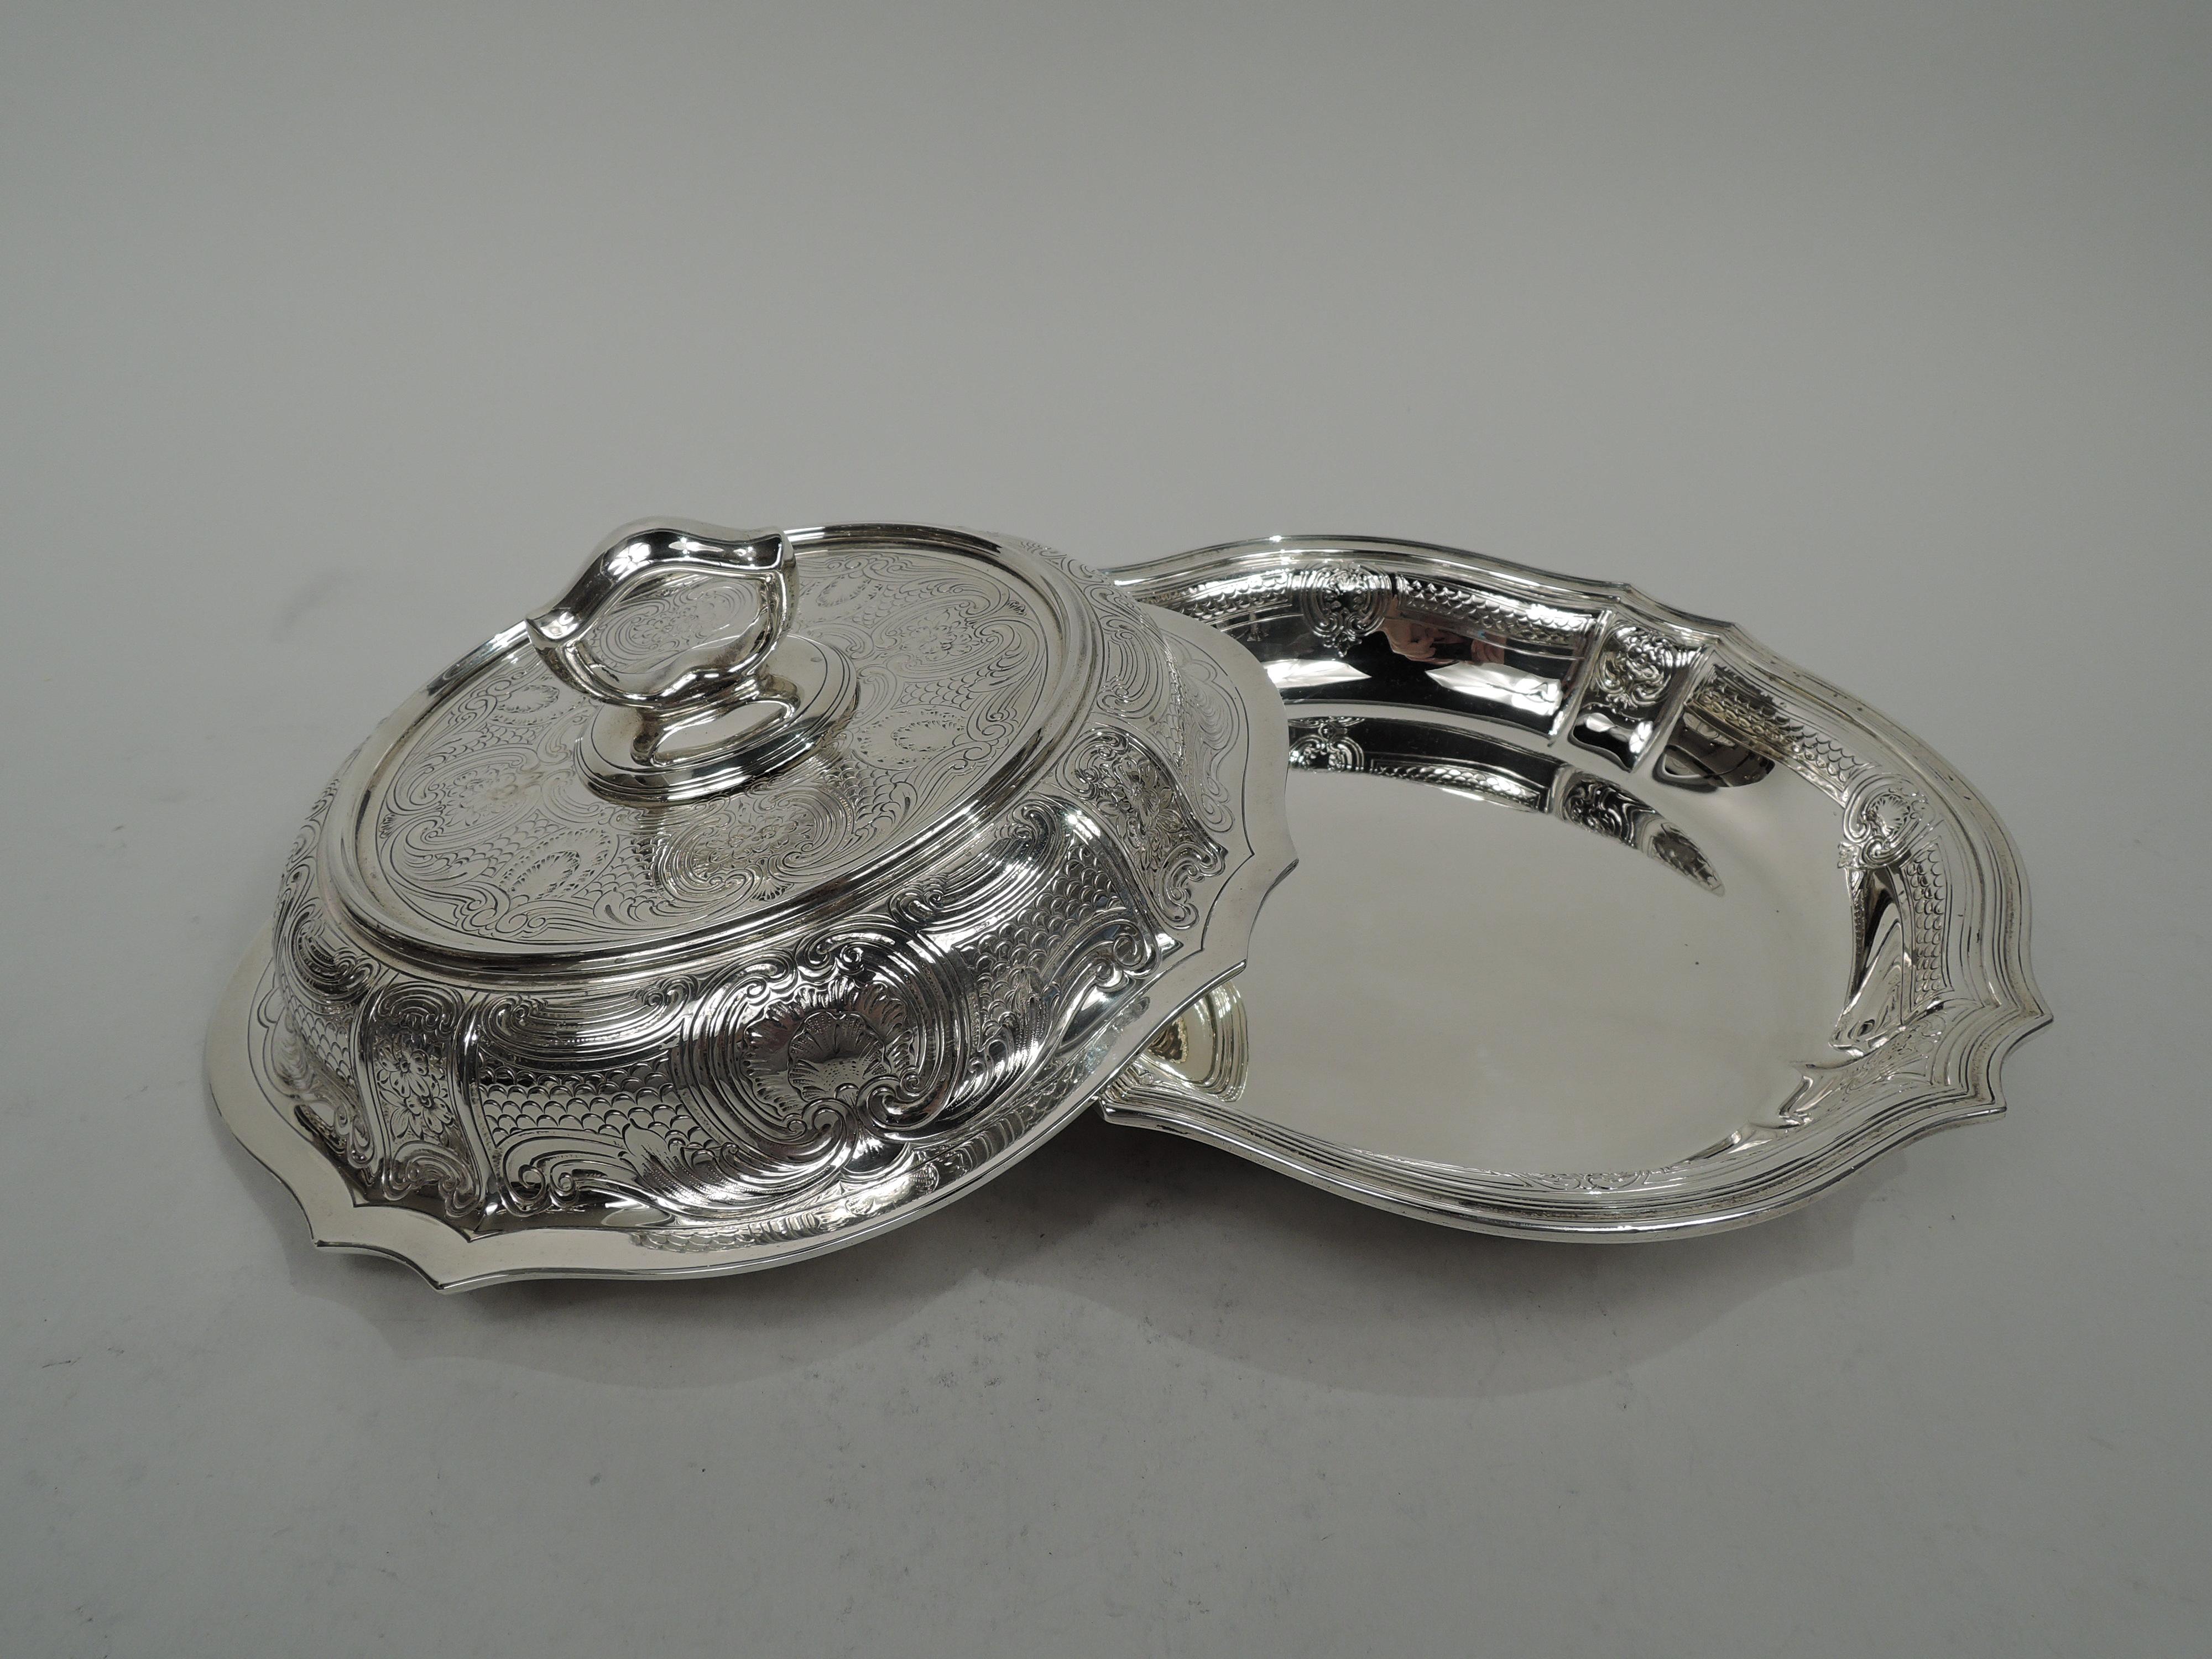 Tiffany Edwardian Modern Classical Sterling Silver Round Serving Bowl In Excellent Condition For Sale In New York, NY